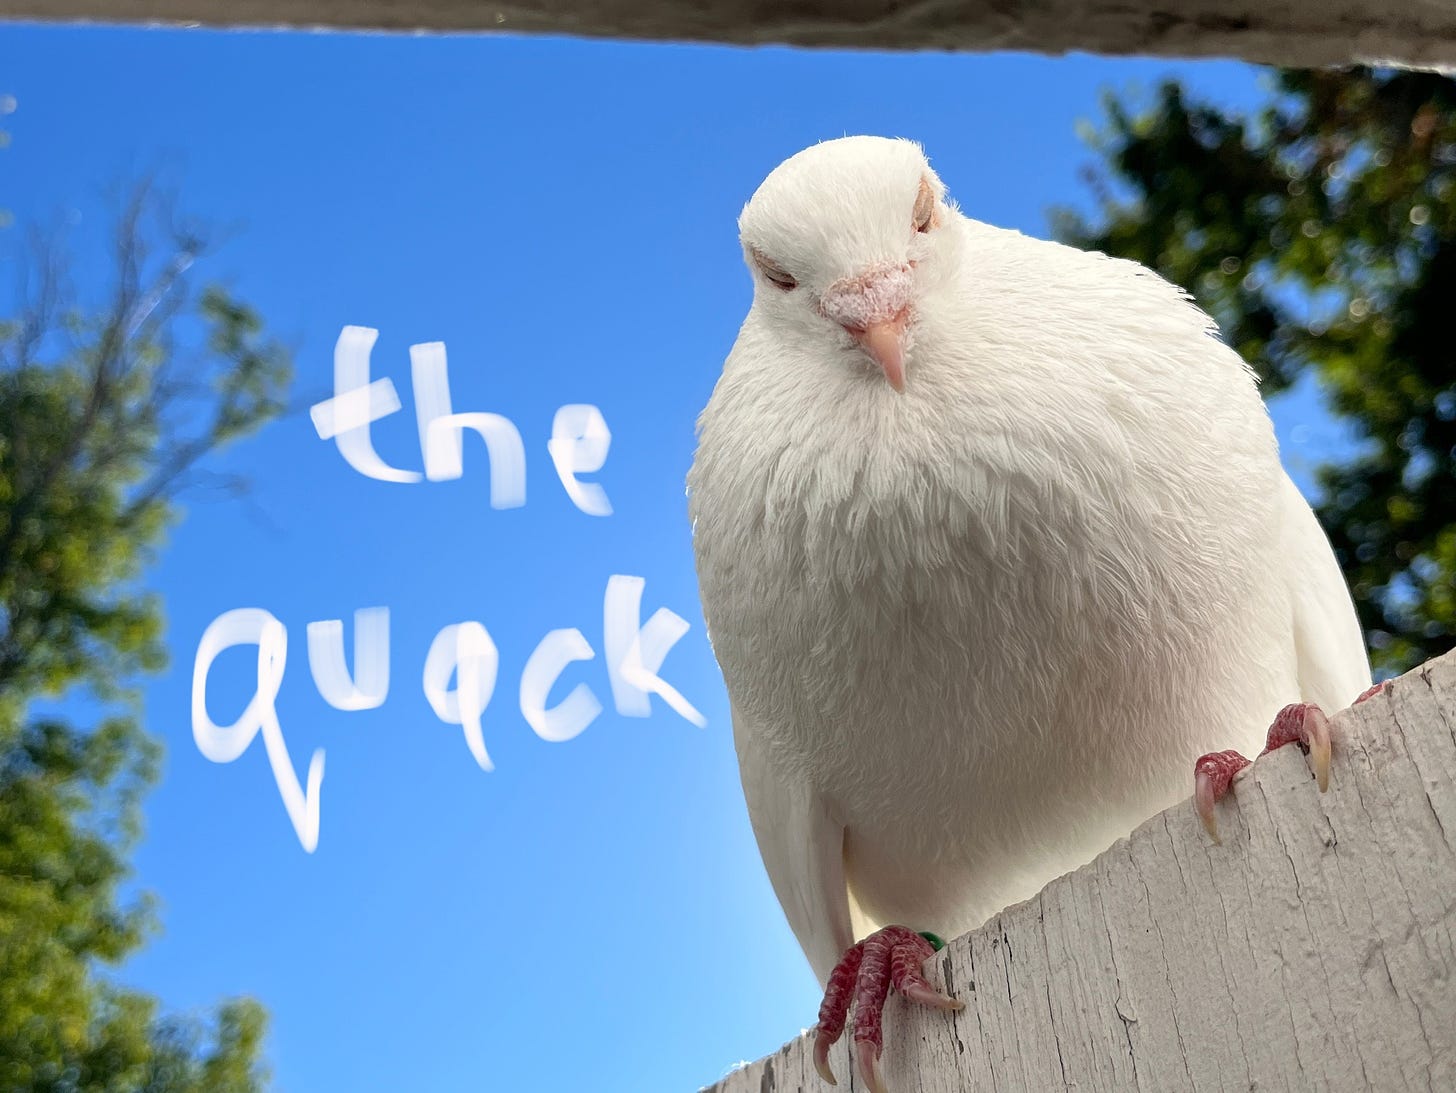 A disgruntled white pigeon glares down at the camera from the top of the door to my shed. Behind him is a clear blue sky, framed with leaves from summer foliage on a couple trees. The words "the quack" are written on the sky in white fluffy letter